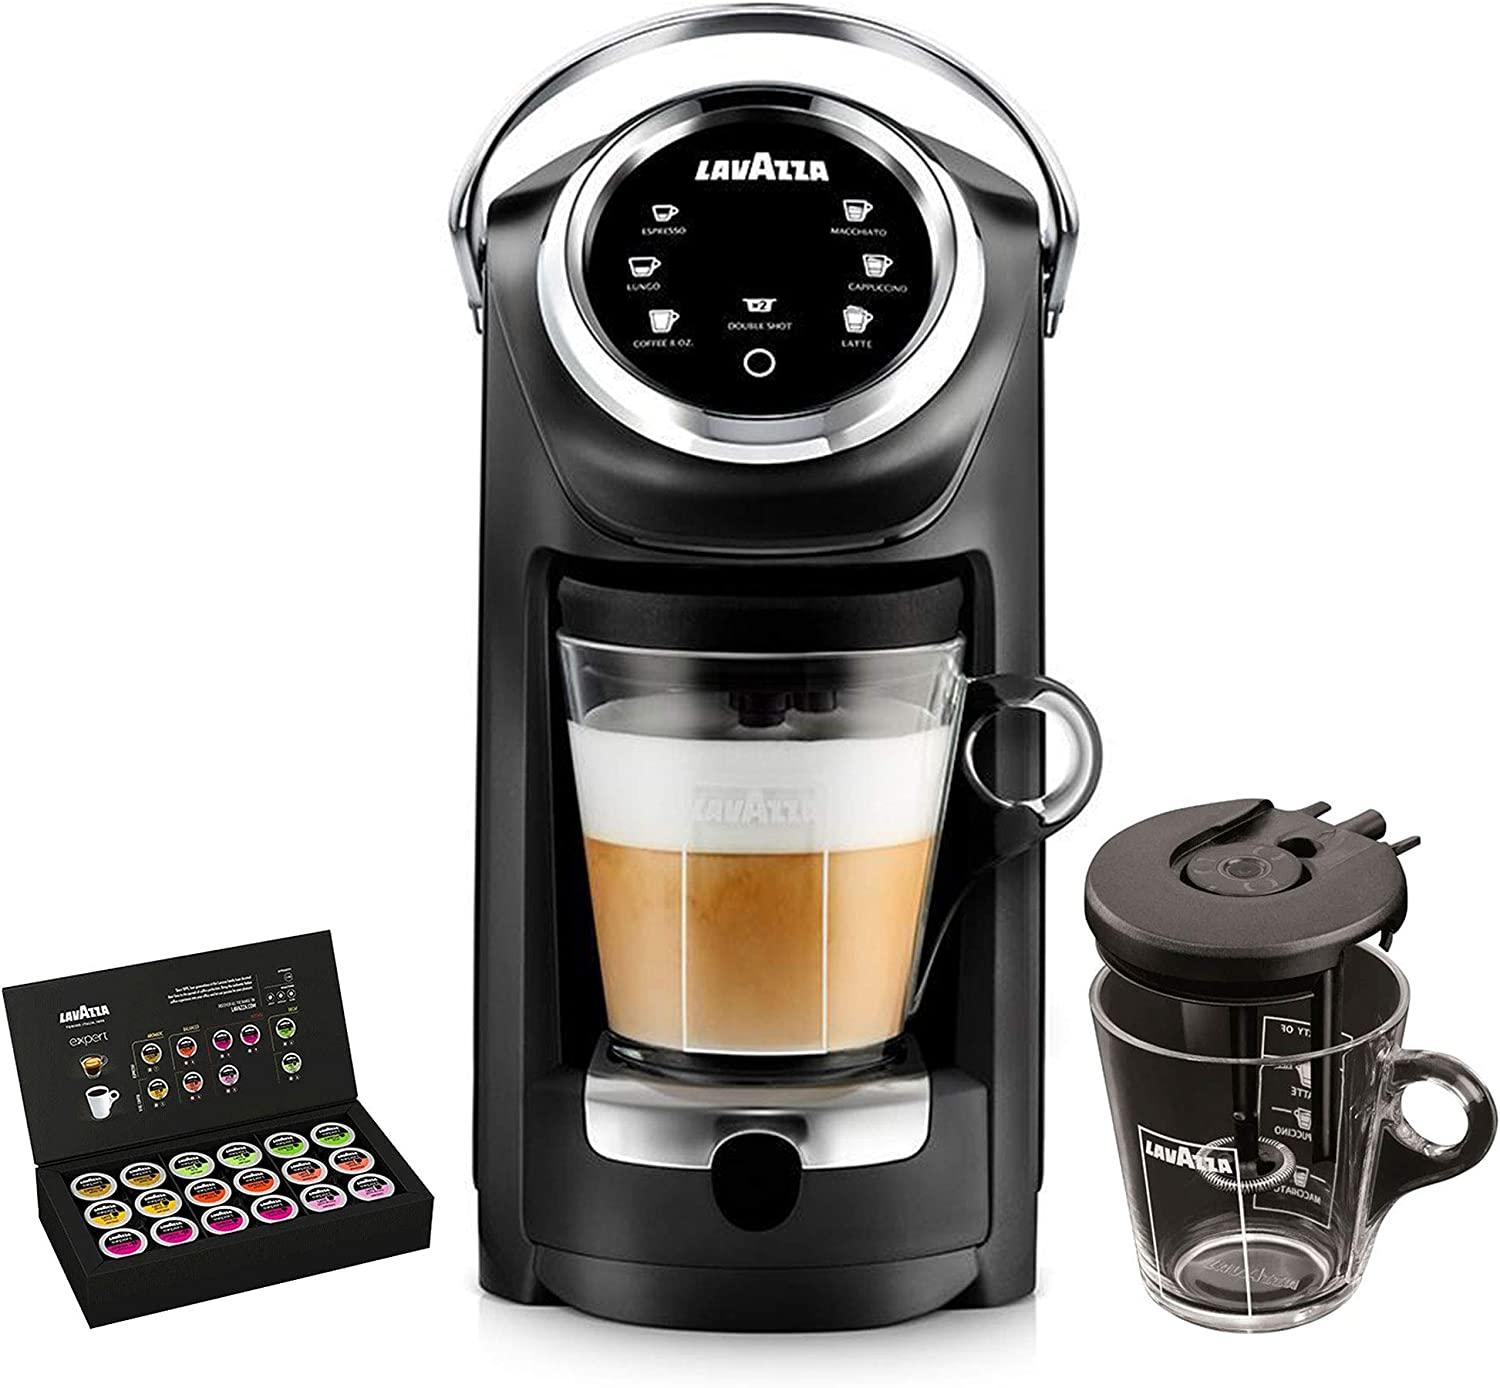 Lavazza Expert Coffee LB 400 All-In-One Coffee Machine Bundle for $65.74 Shipped